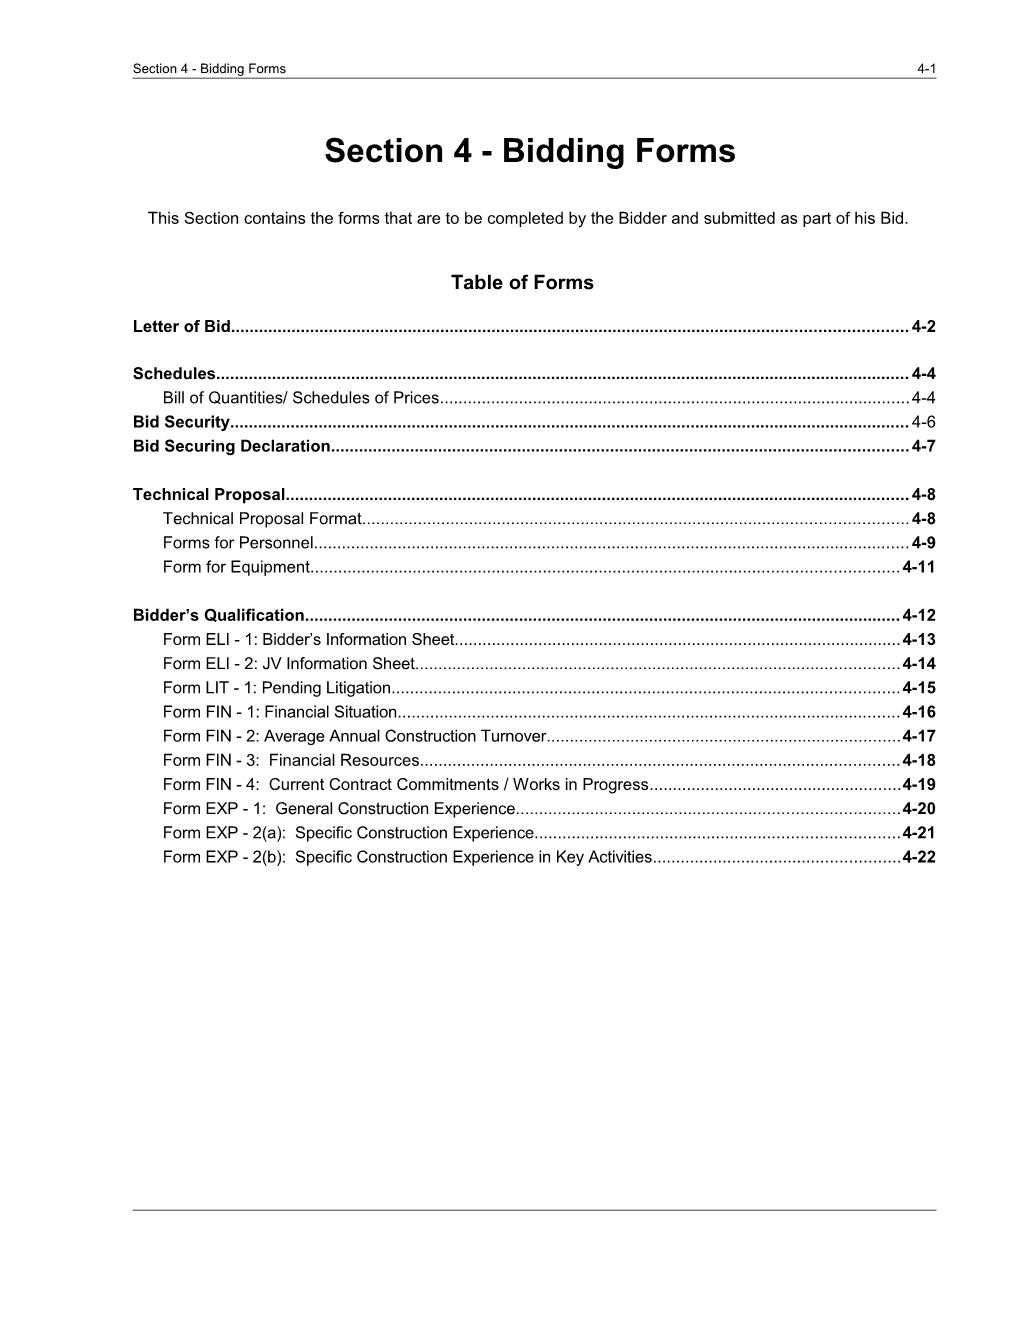 Section 4 - Bidding Forms